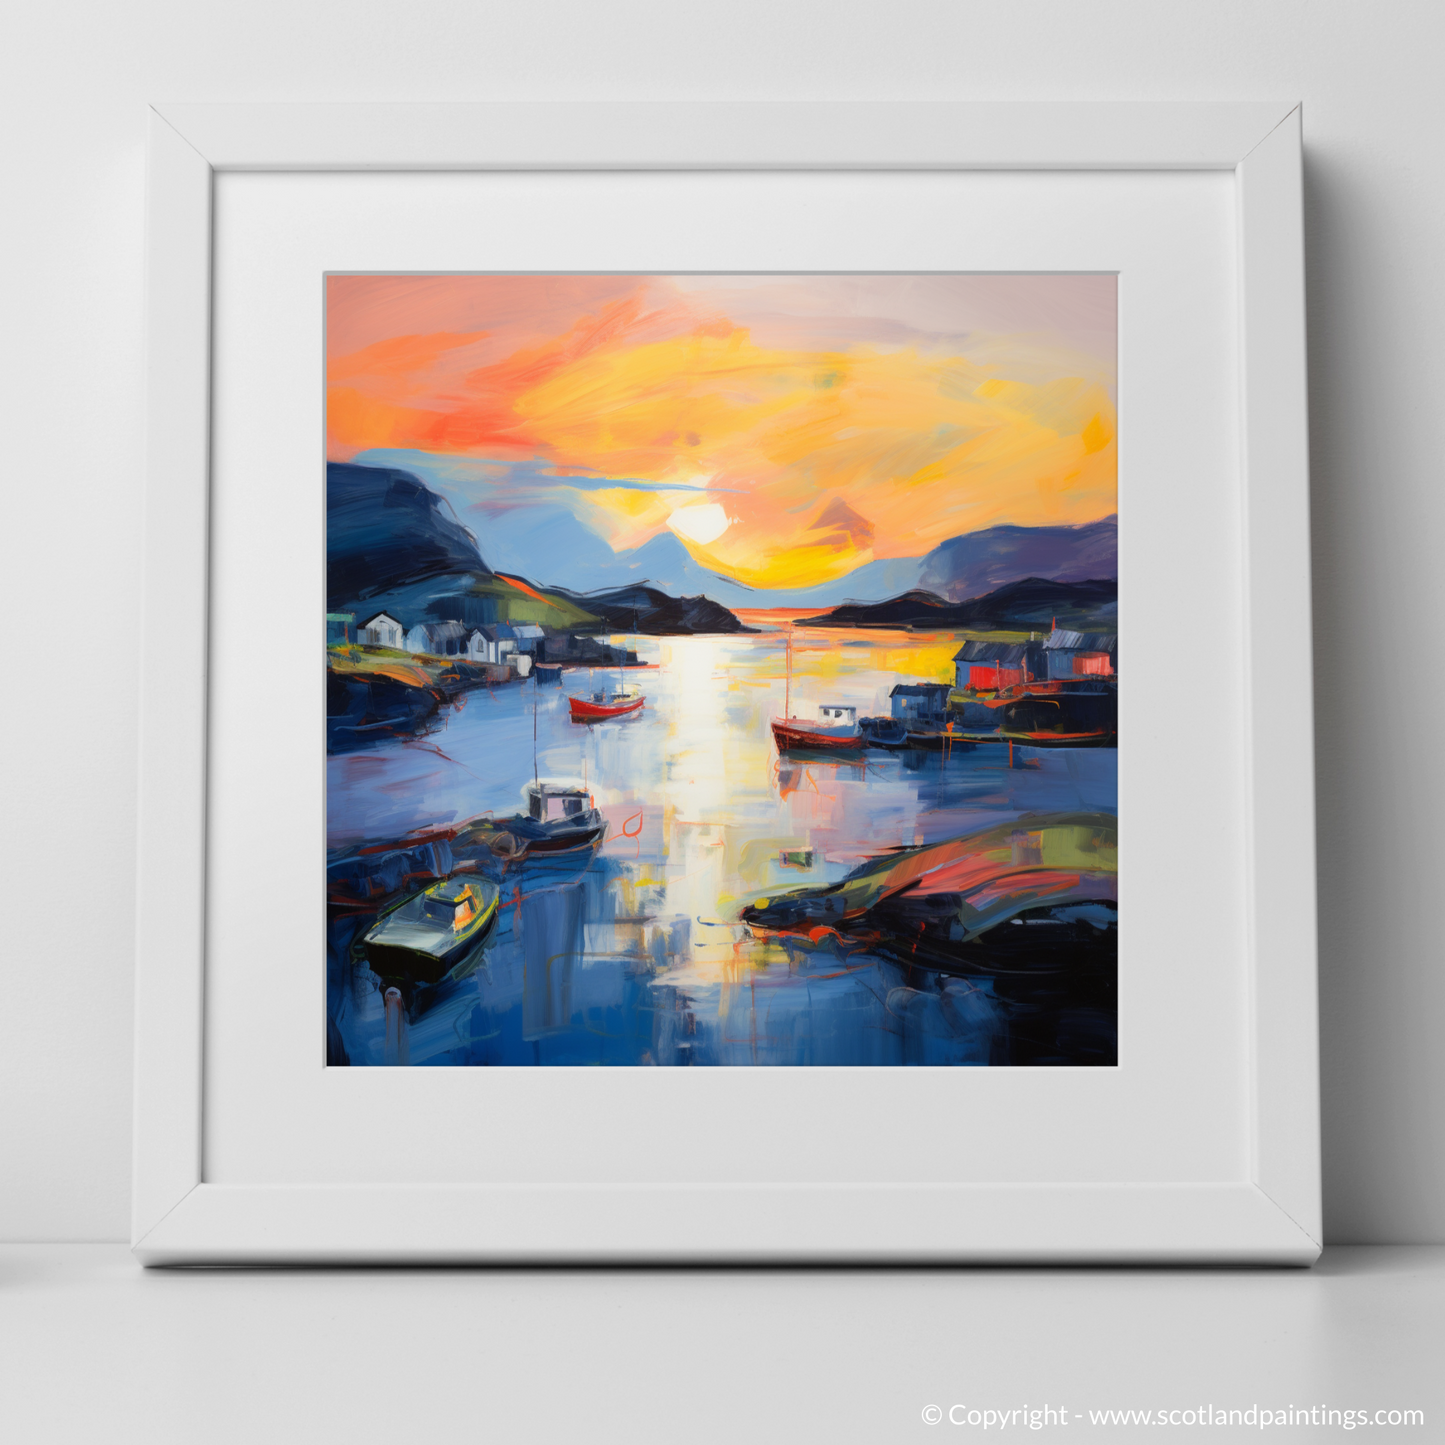 Isleornsay Harbour at Dusk: An Abstract Expressionist Ode to Twilight